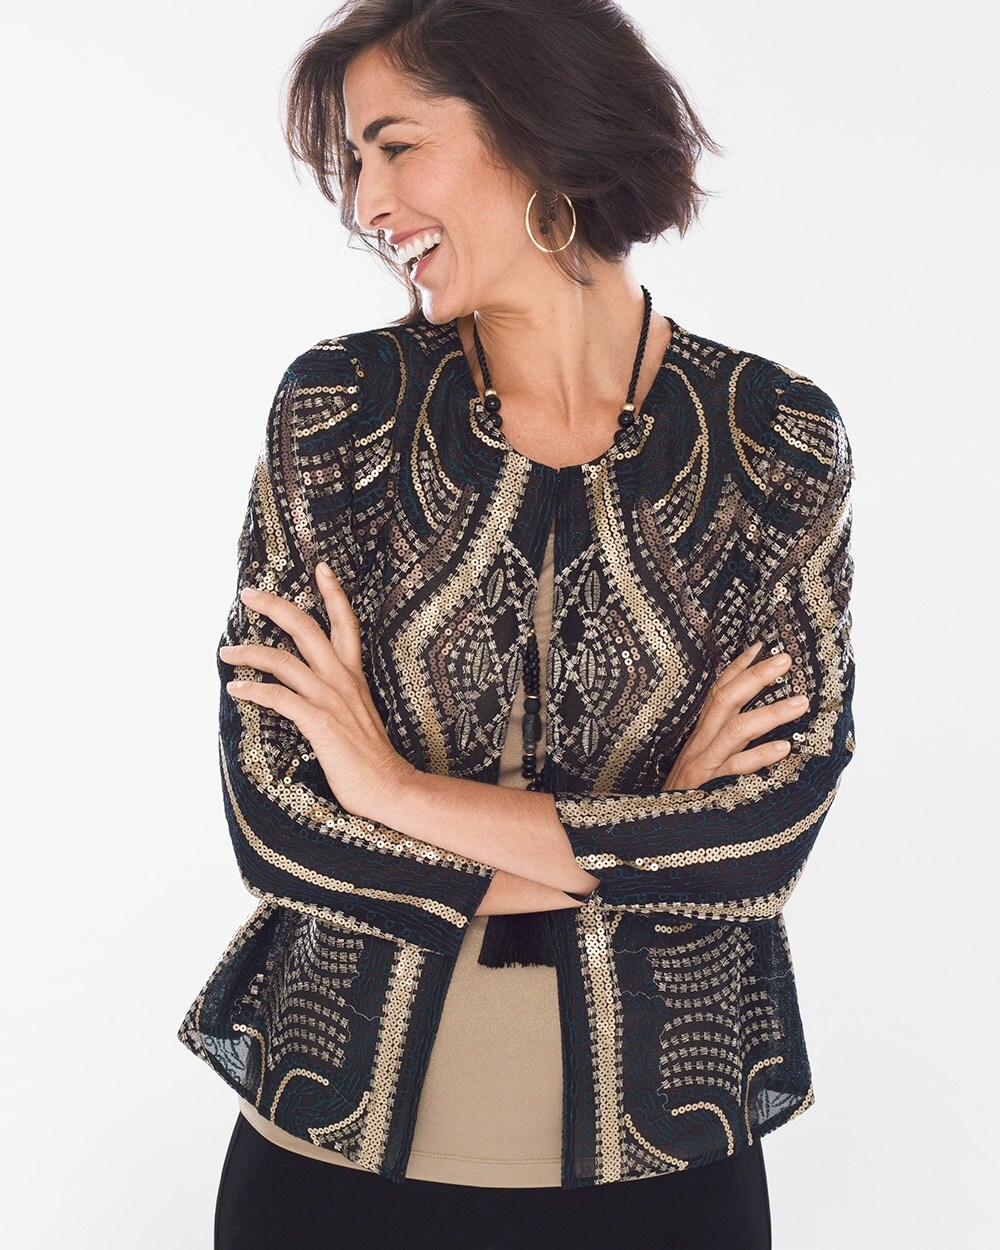 Travelers Collection Black and Gold Sequin Jacket